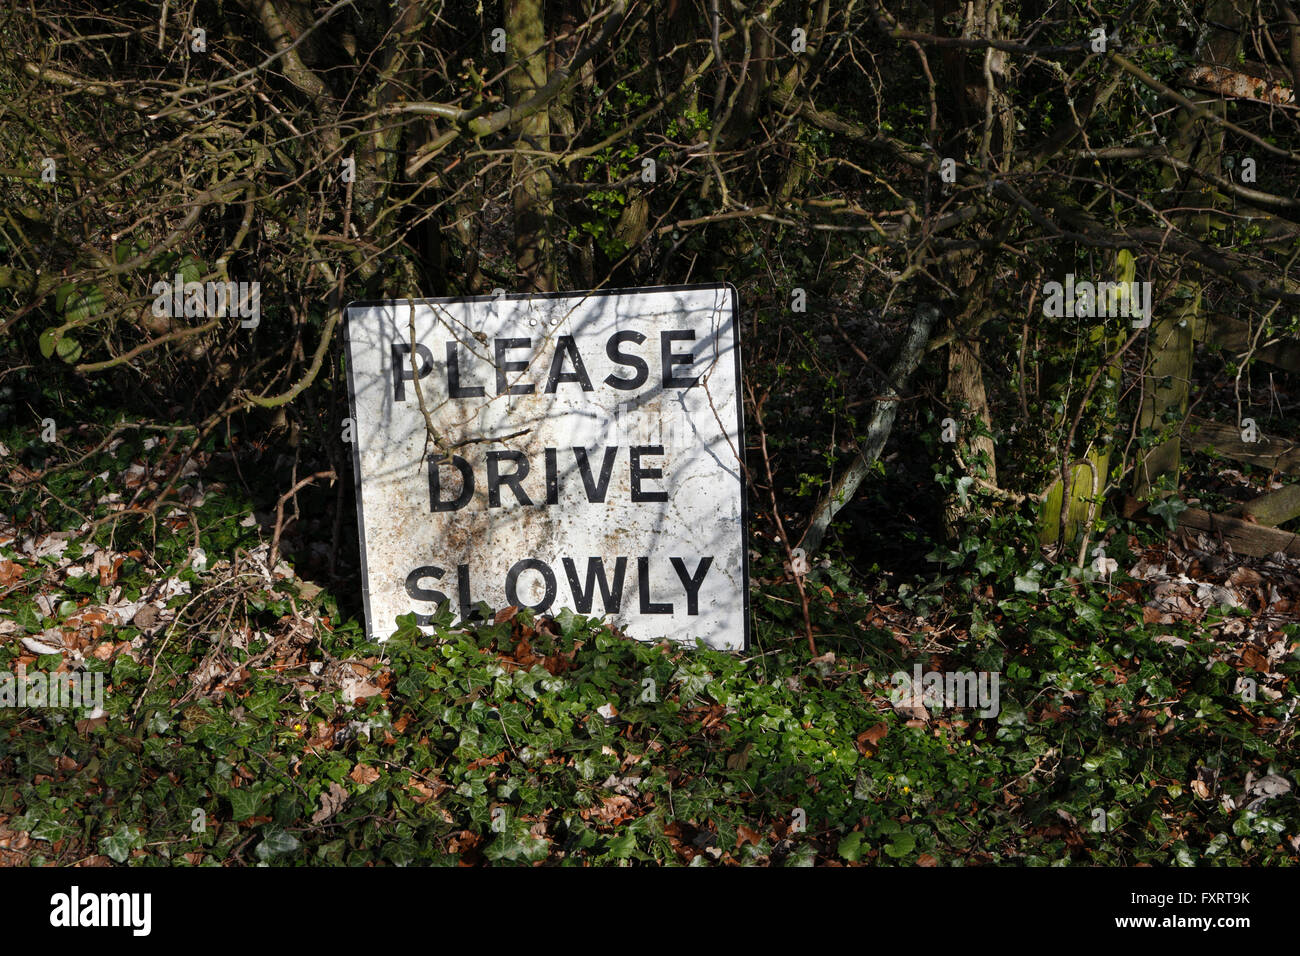 Please Drive Slowly sign by a country lane Stock Photo